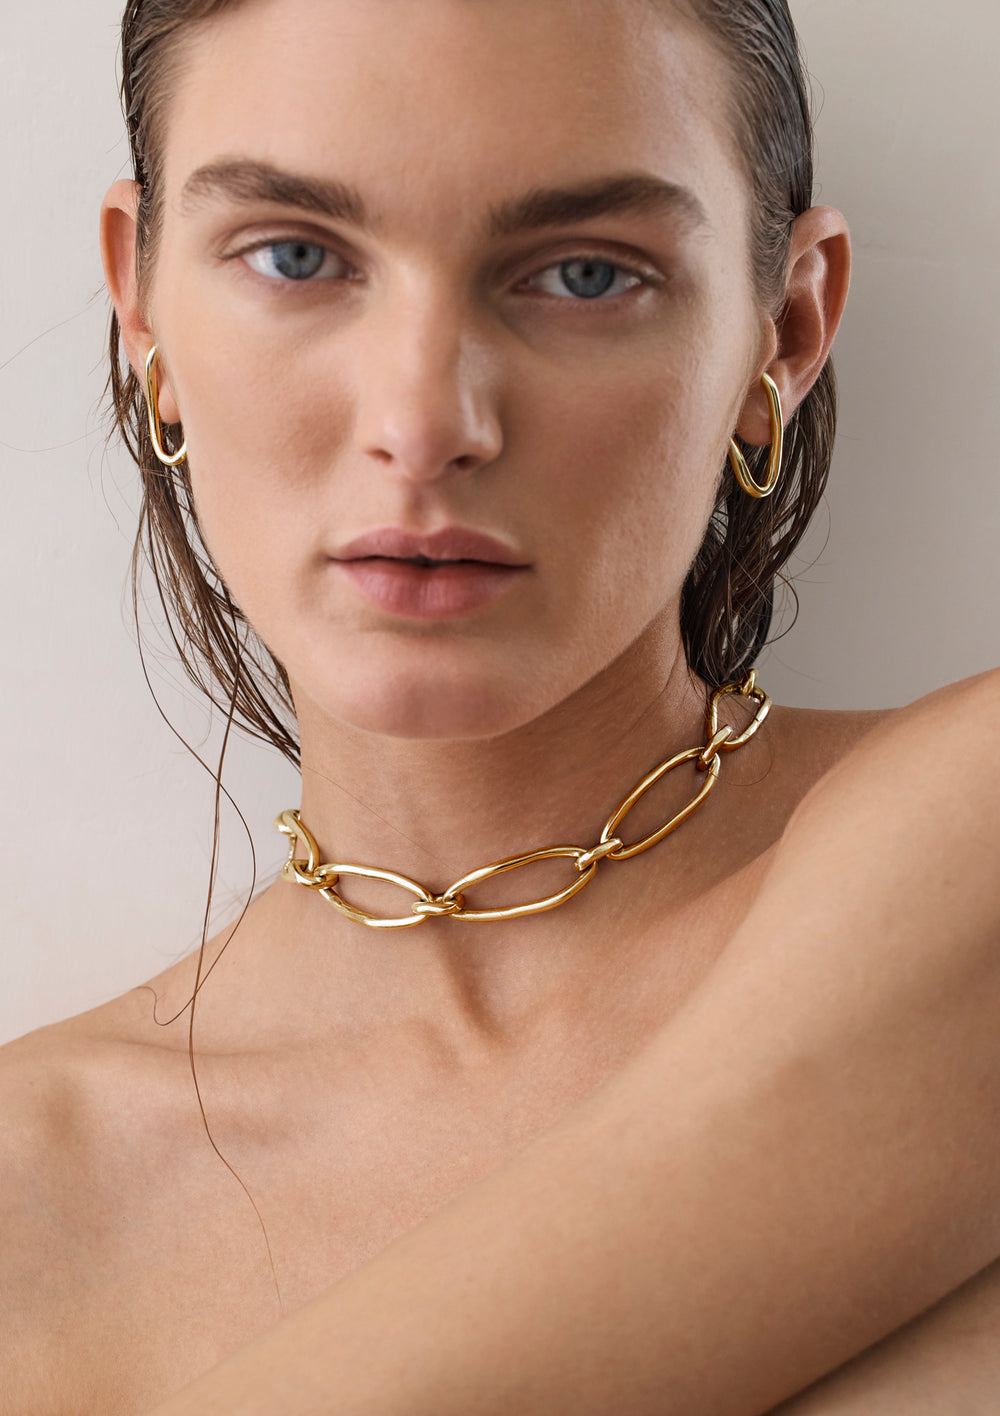 Oval Link Necklace | Gold